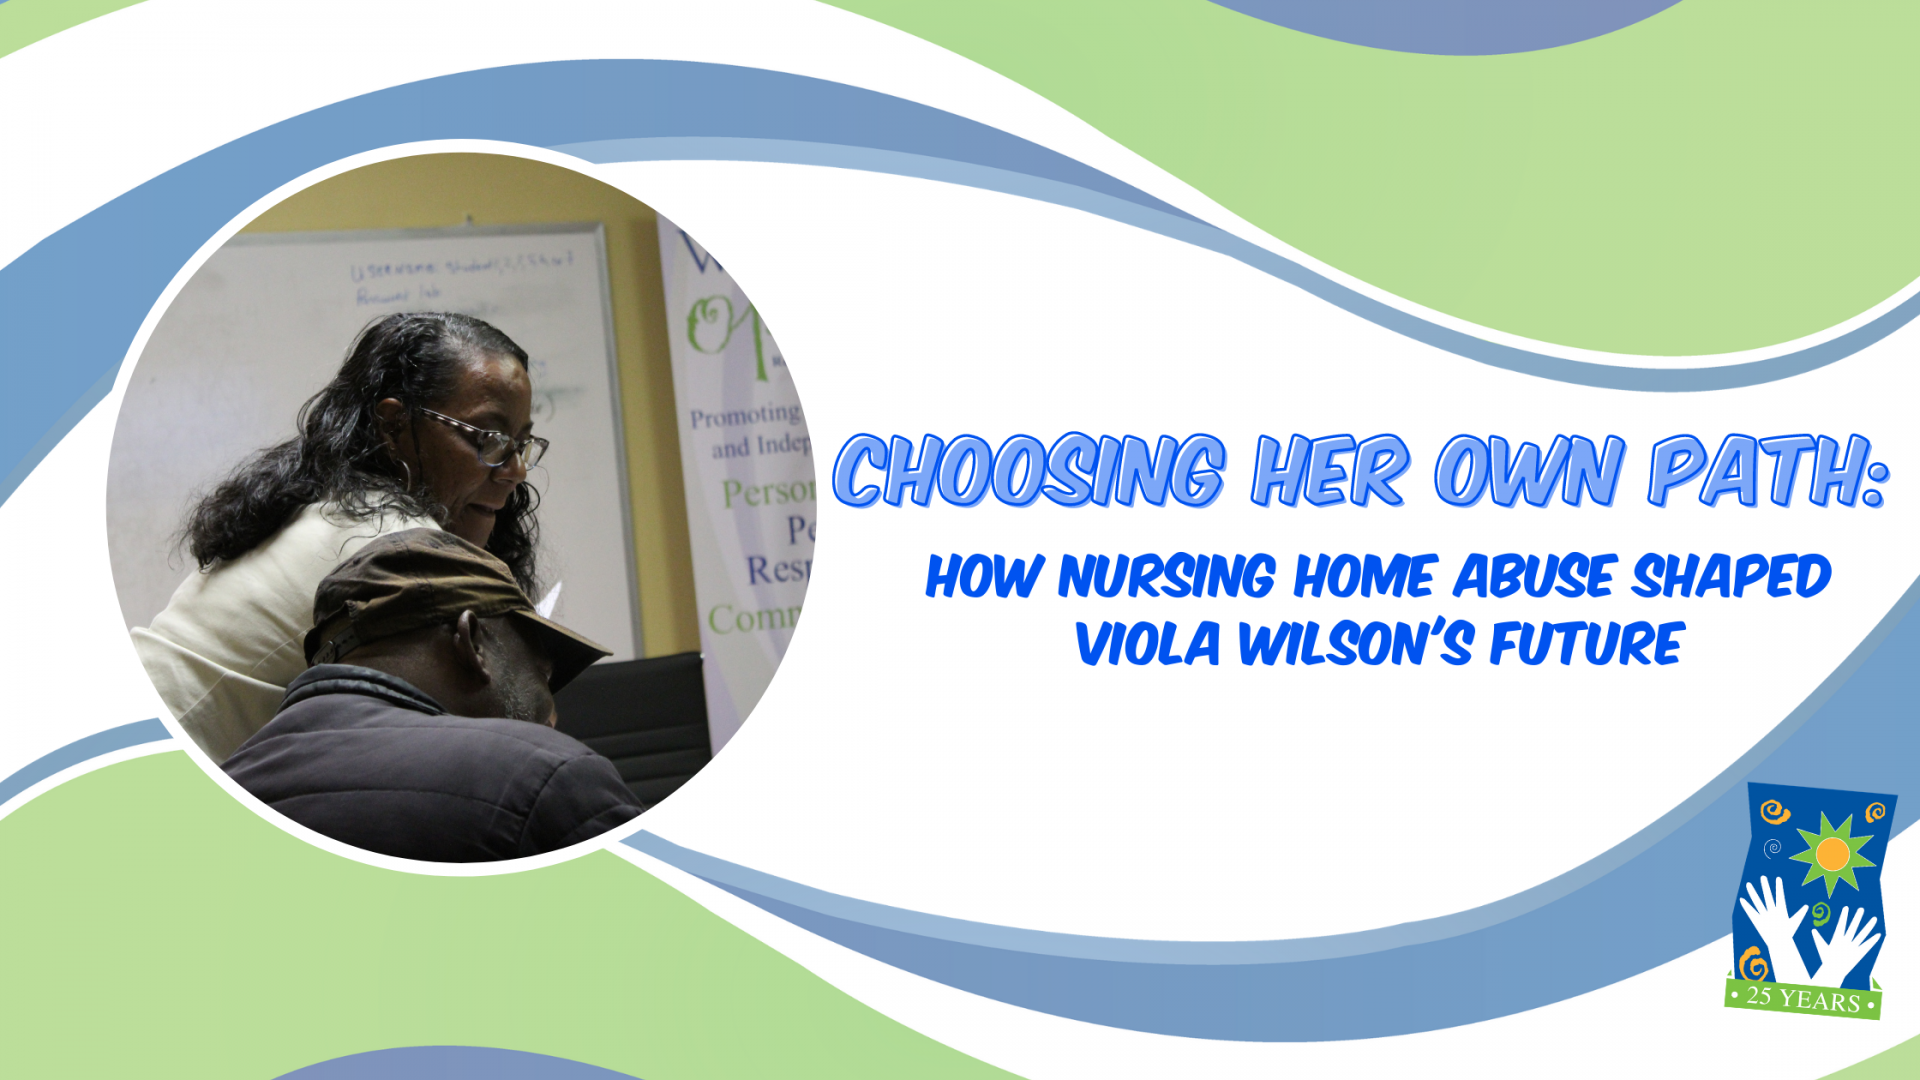 Cover image for article, "Choosing Her Own Path: How Nursing Home Abuse Shaped Viola Wilson's Future